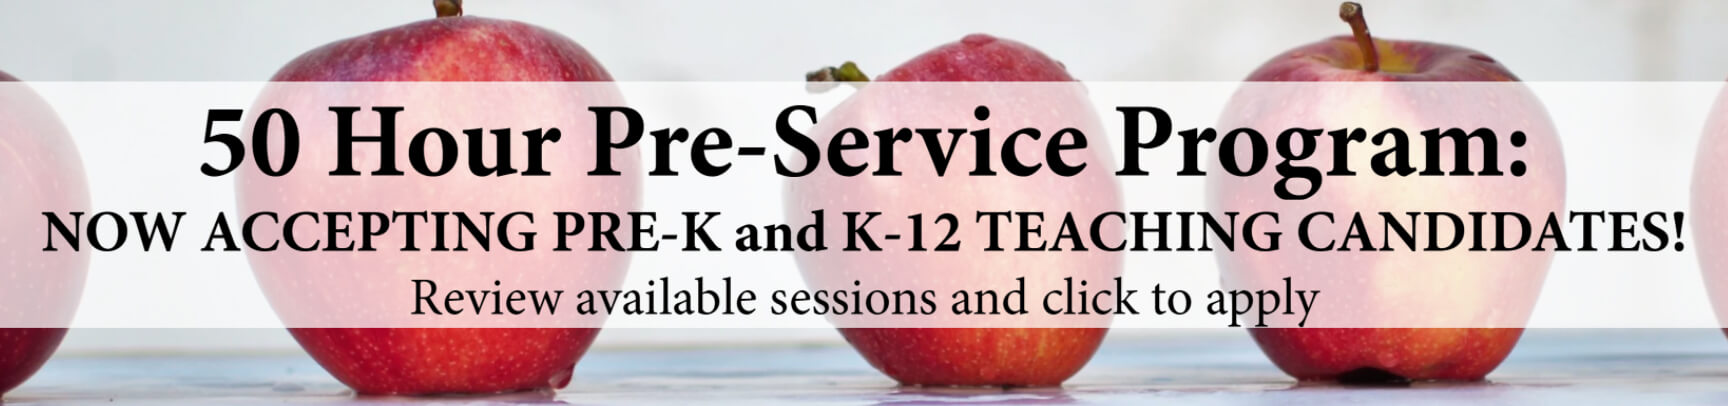 50 Hour Pre-Service Program: Now Accepting Pre-K and K-12 Teaching Candidates! Review available sessions and click to apply.